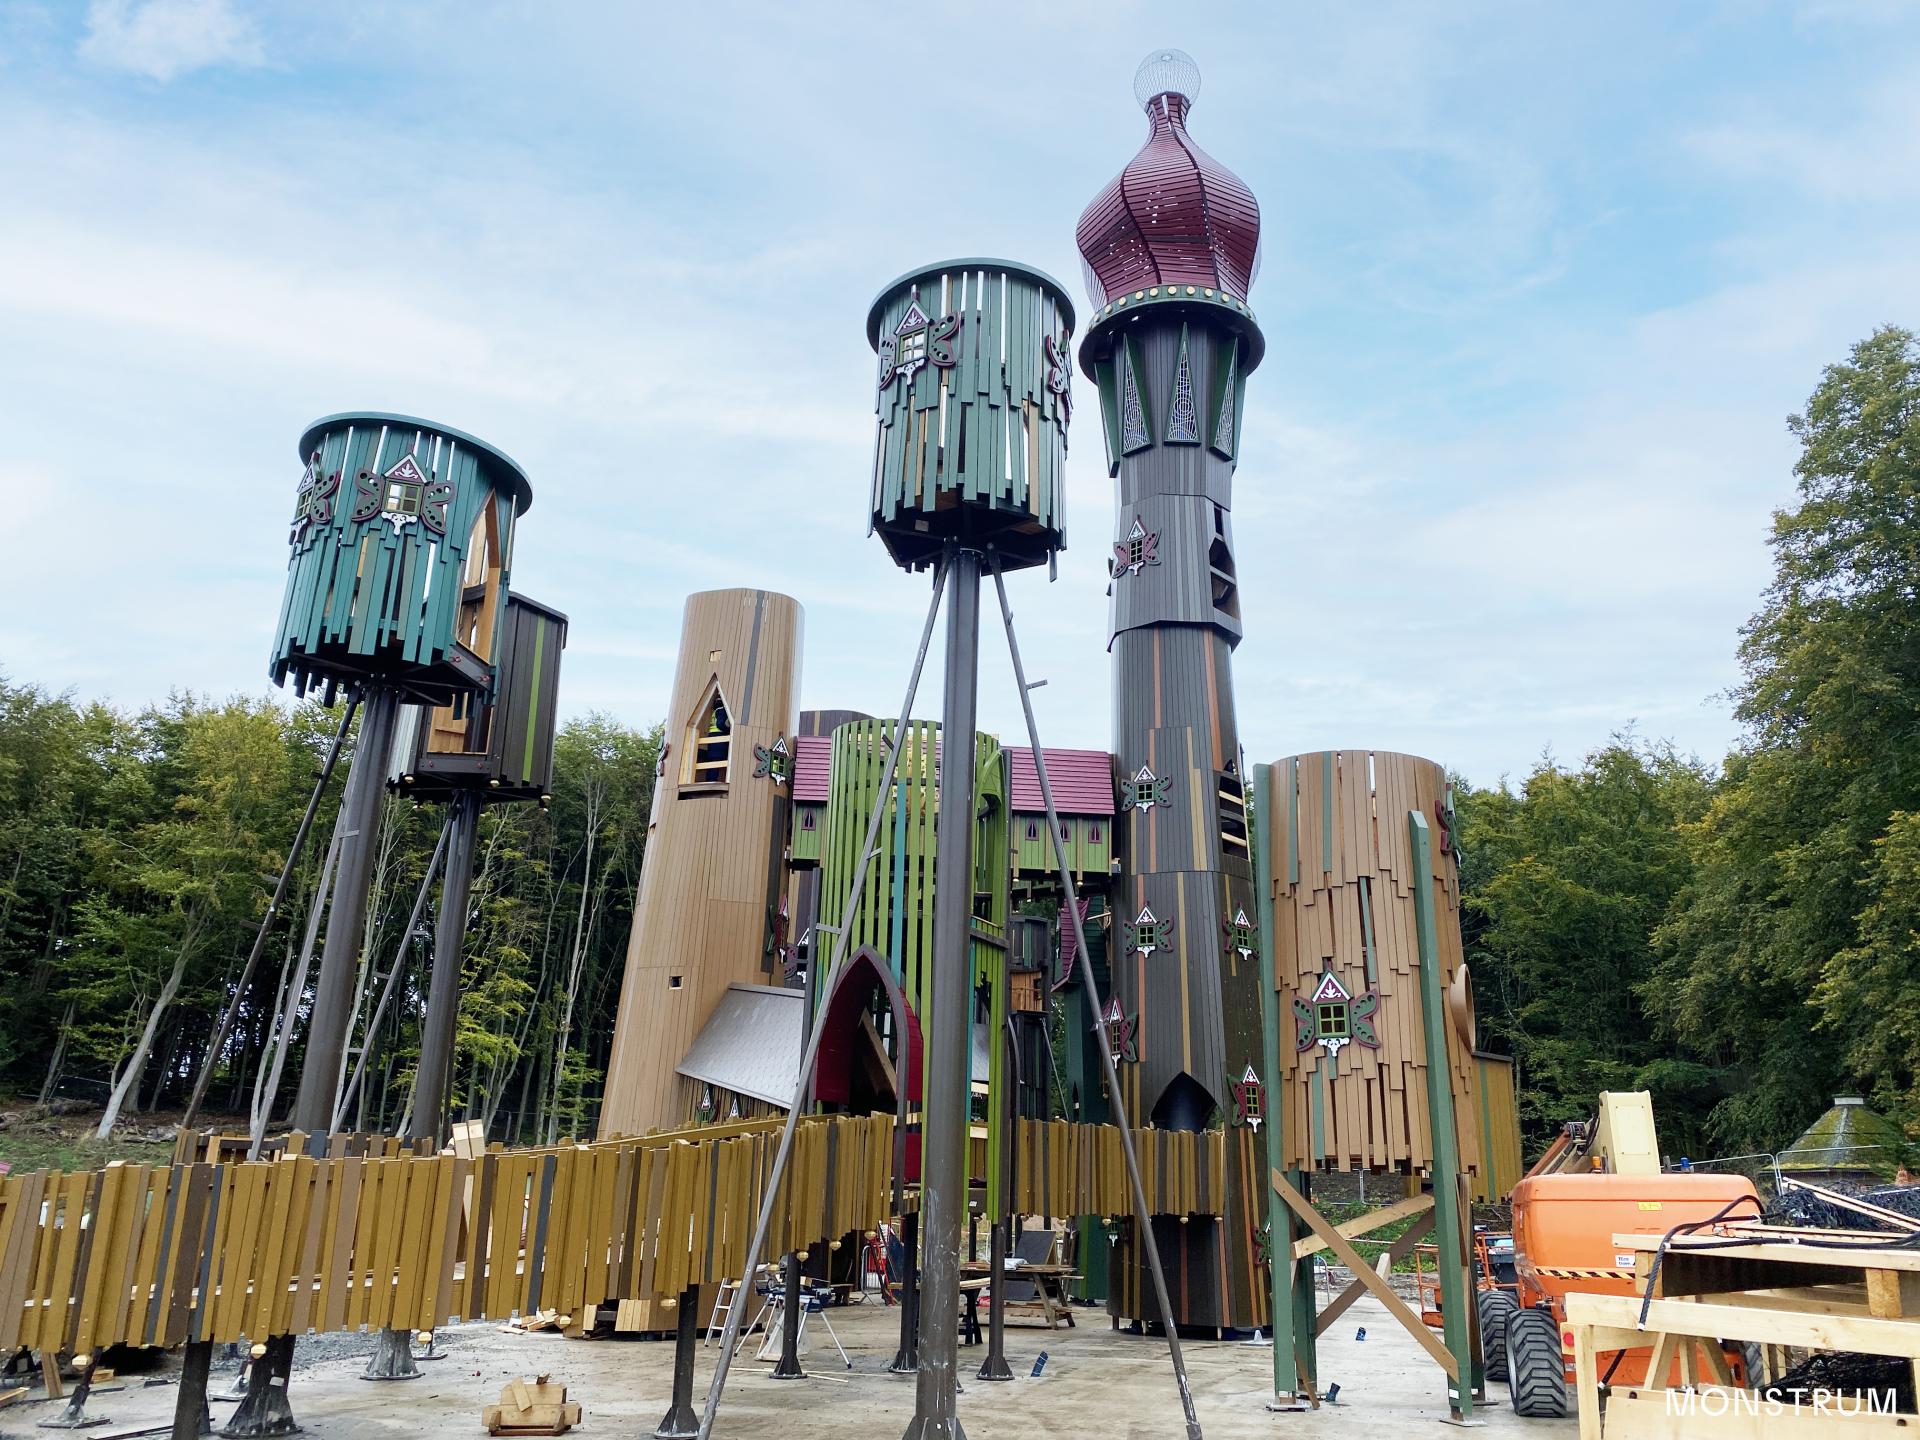 Towers at Lilidorei playground at The Alnwick Garden